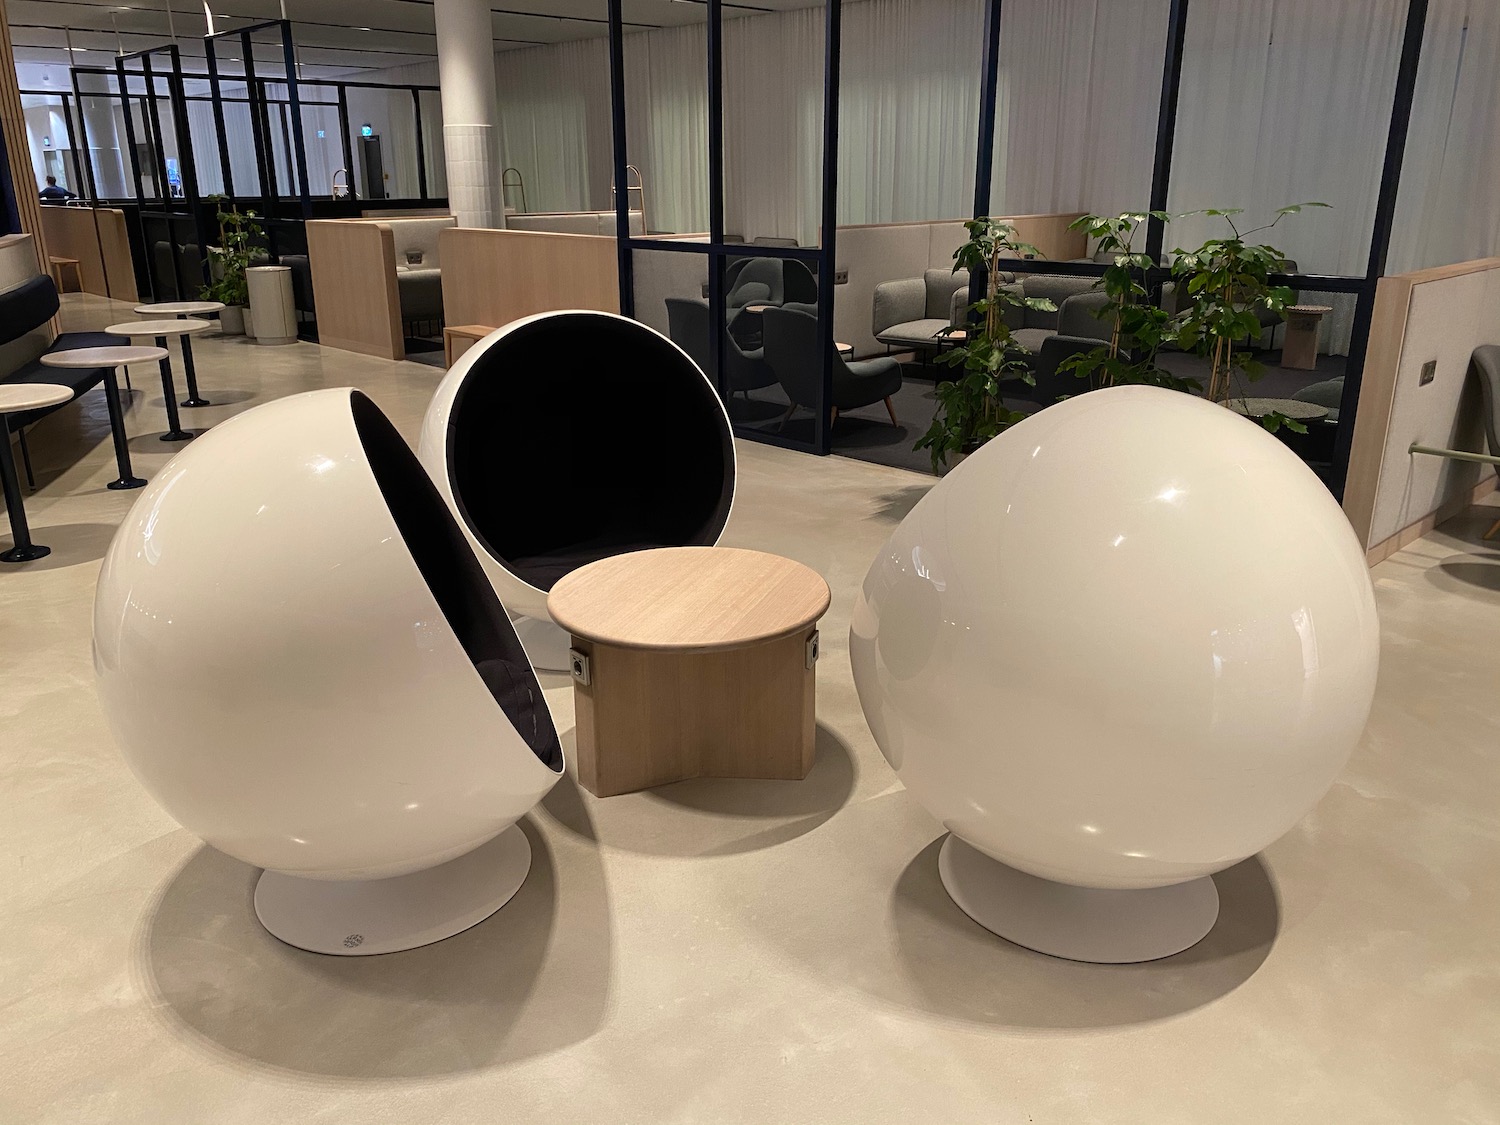 a group of white round objects with a black cover